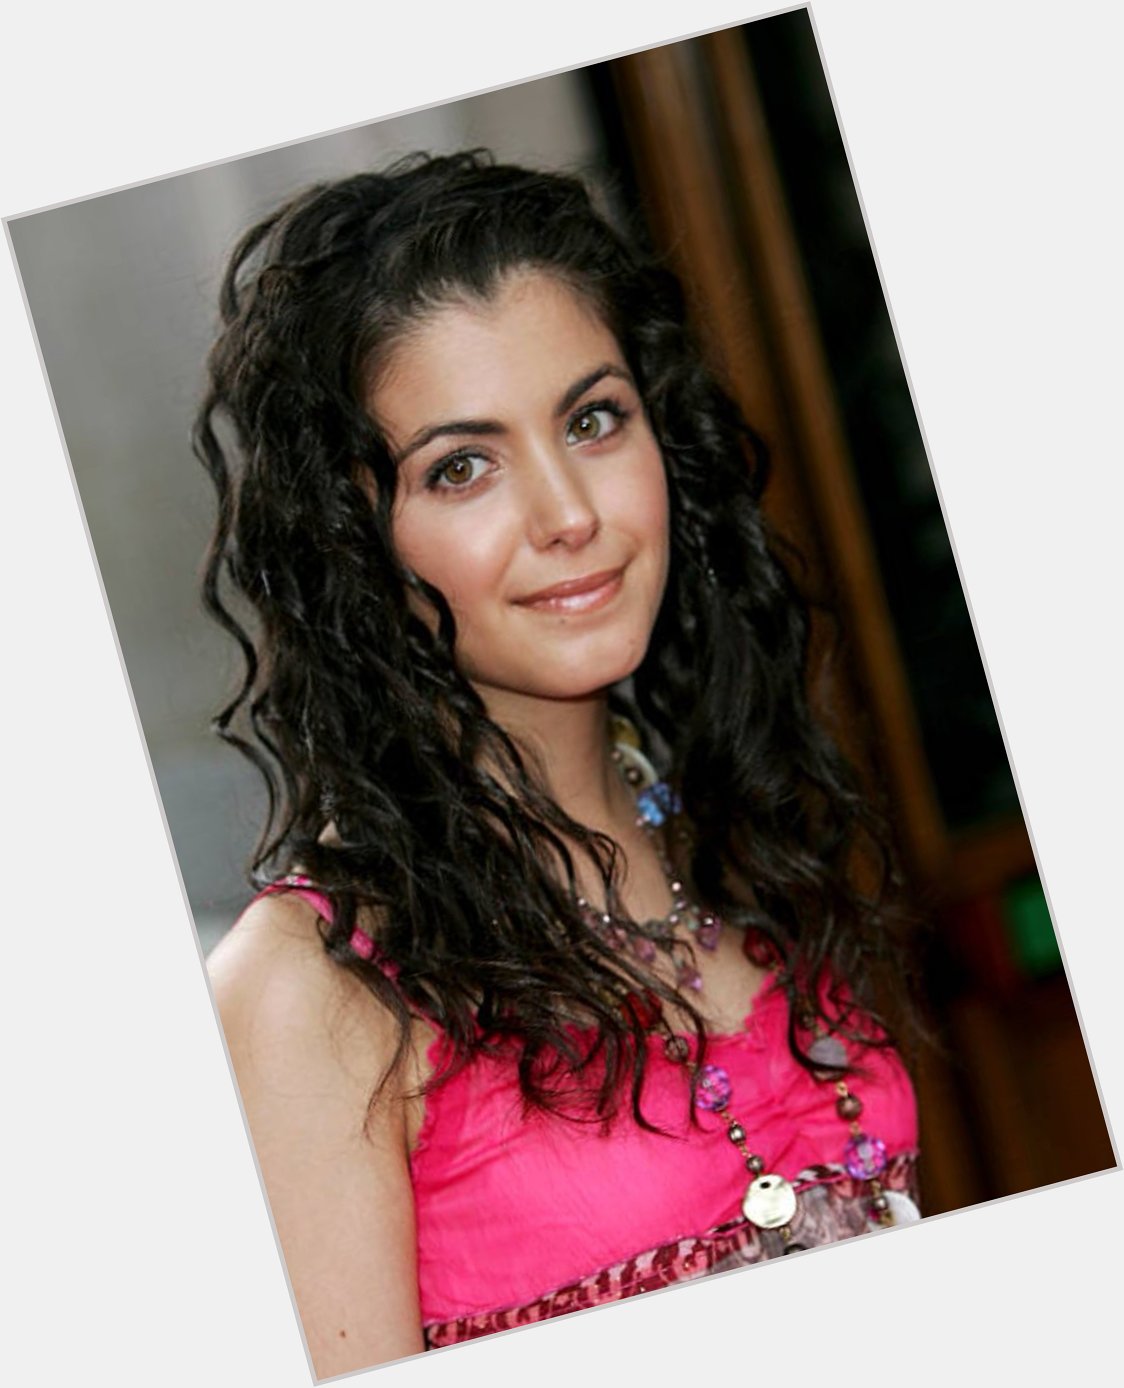 Happy Birthday to singer songwriter and guitarist Katie Melua, born on this day in Kutaisi, Georgia in 1984.    